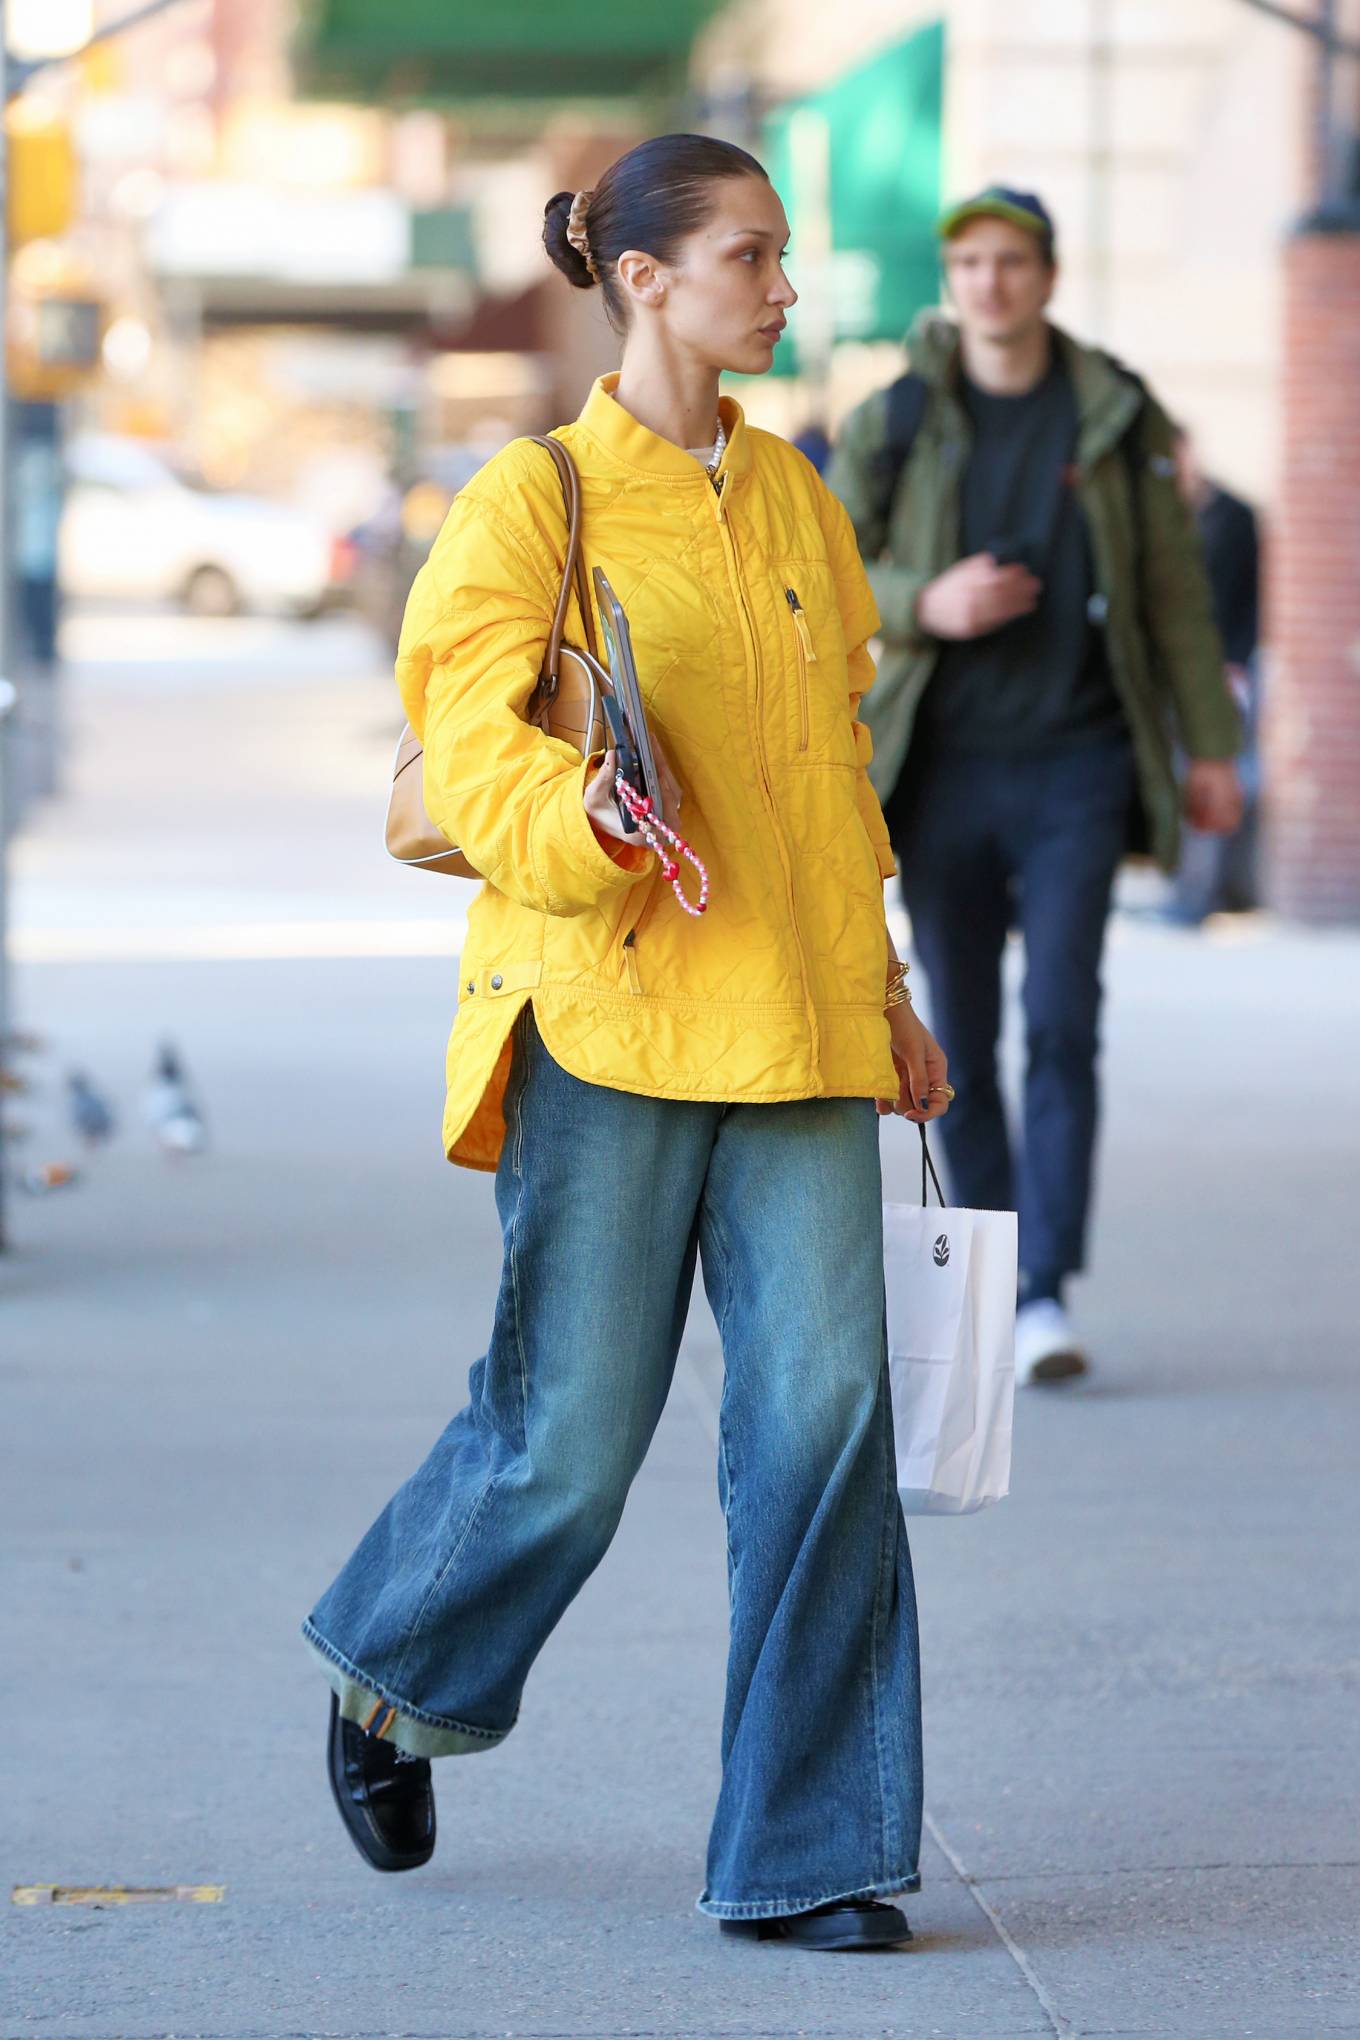 Bella Hadid 2022 : Bella Hadid – Dons baggy jeans while out in New York-04